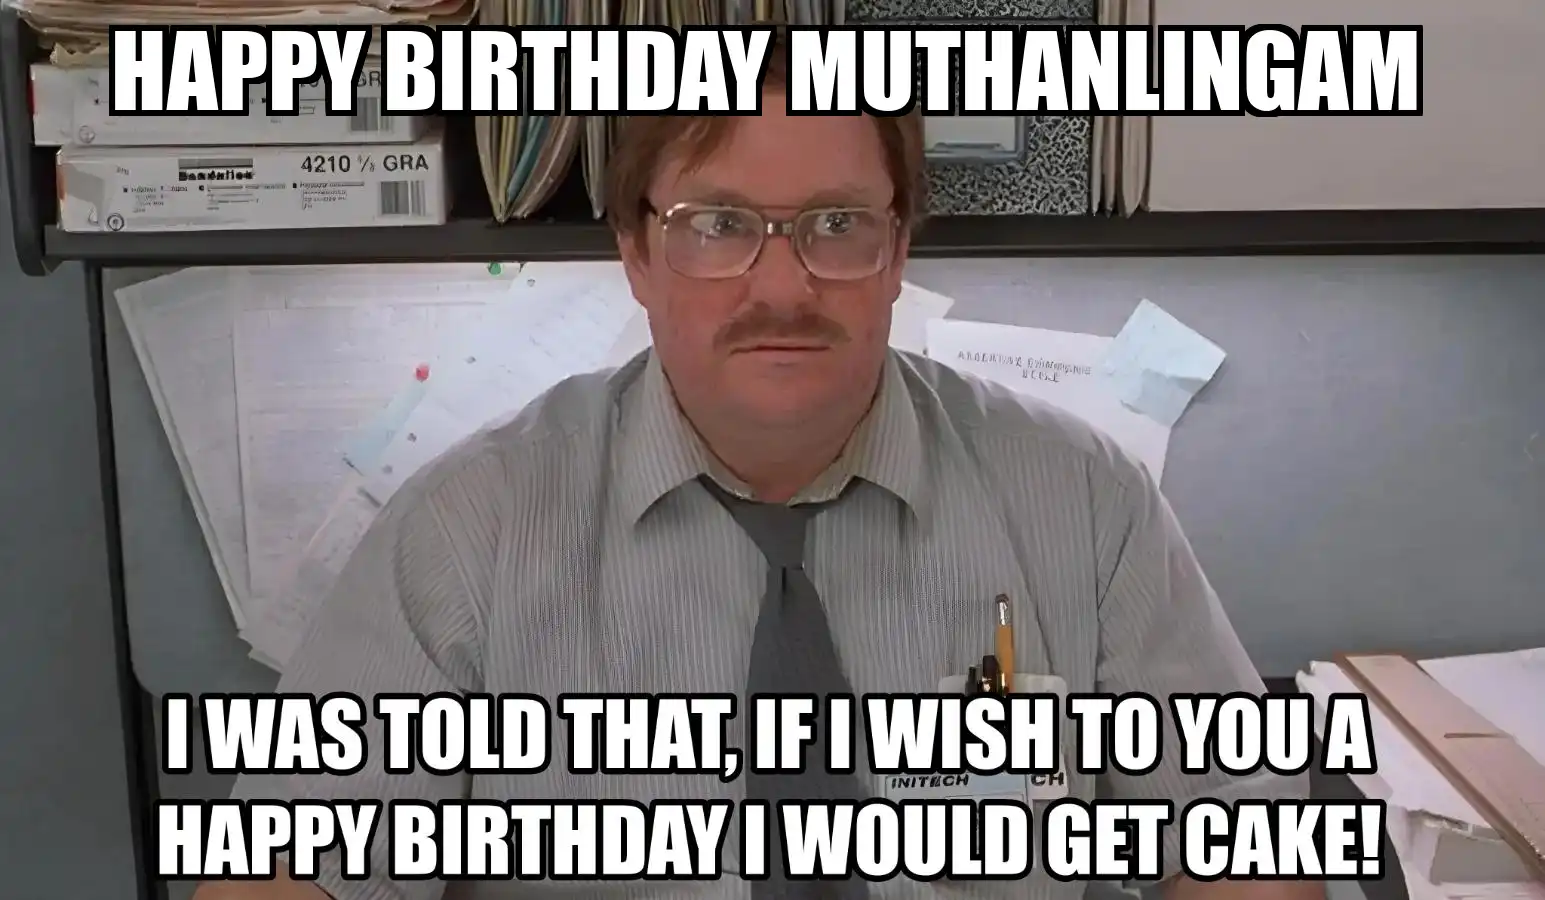 Happy Birthday Muthanlingam I Would Get A Cake Meme